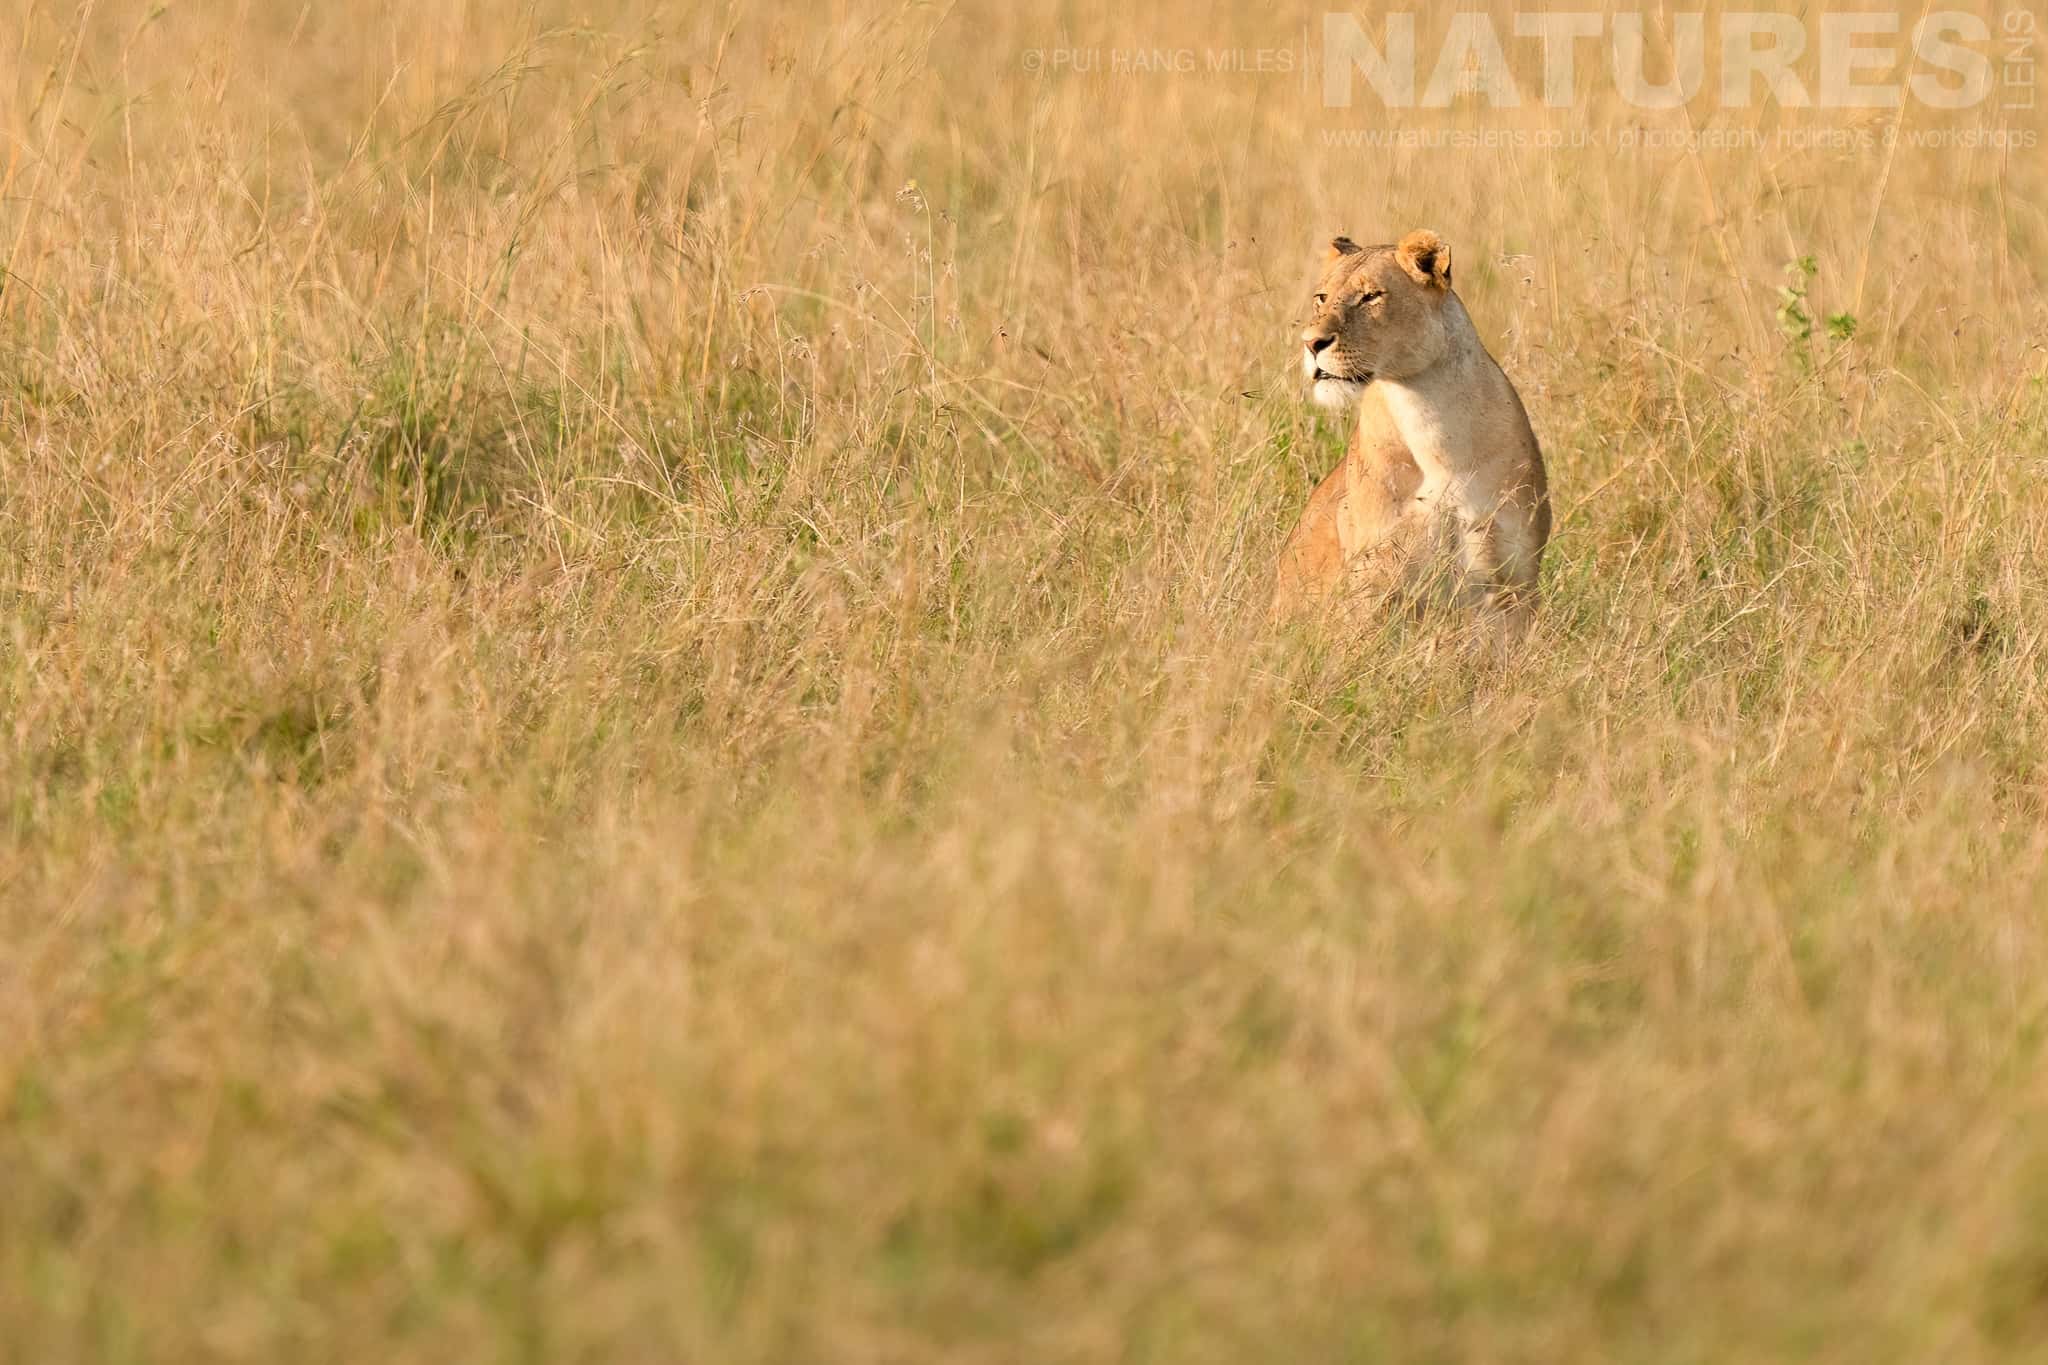 A Topi Pride Lioness Sat In The Long Grass Photographed During A Natureslens Photography Holiday To Photograph The Wildlife Of The Maasai Mara